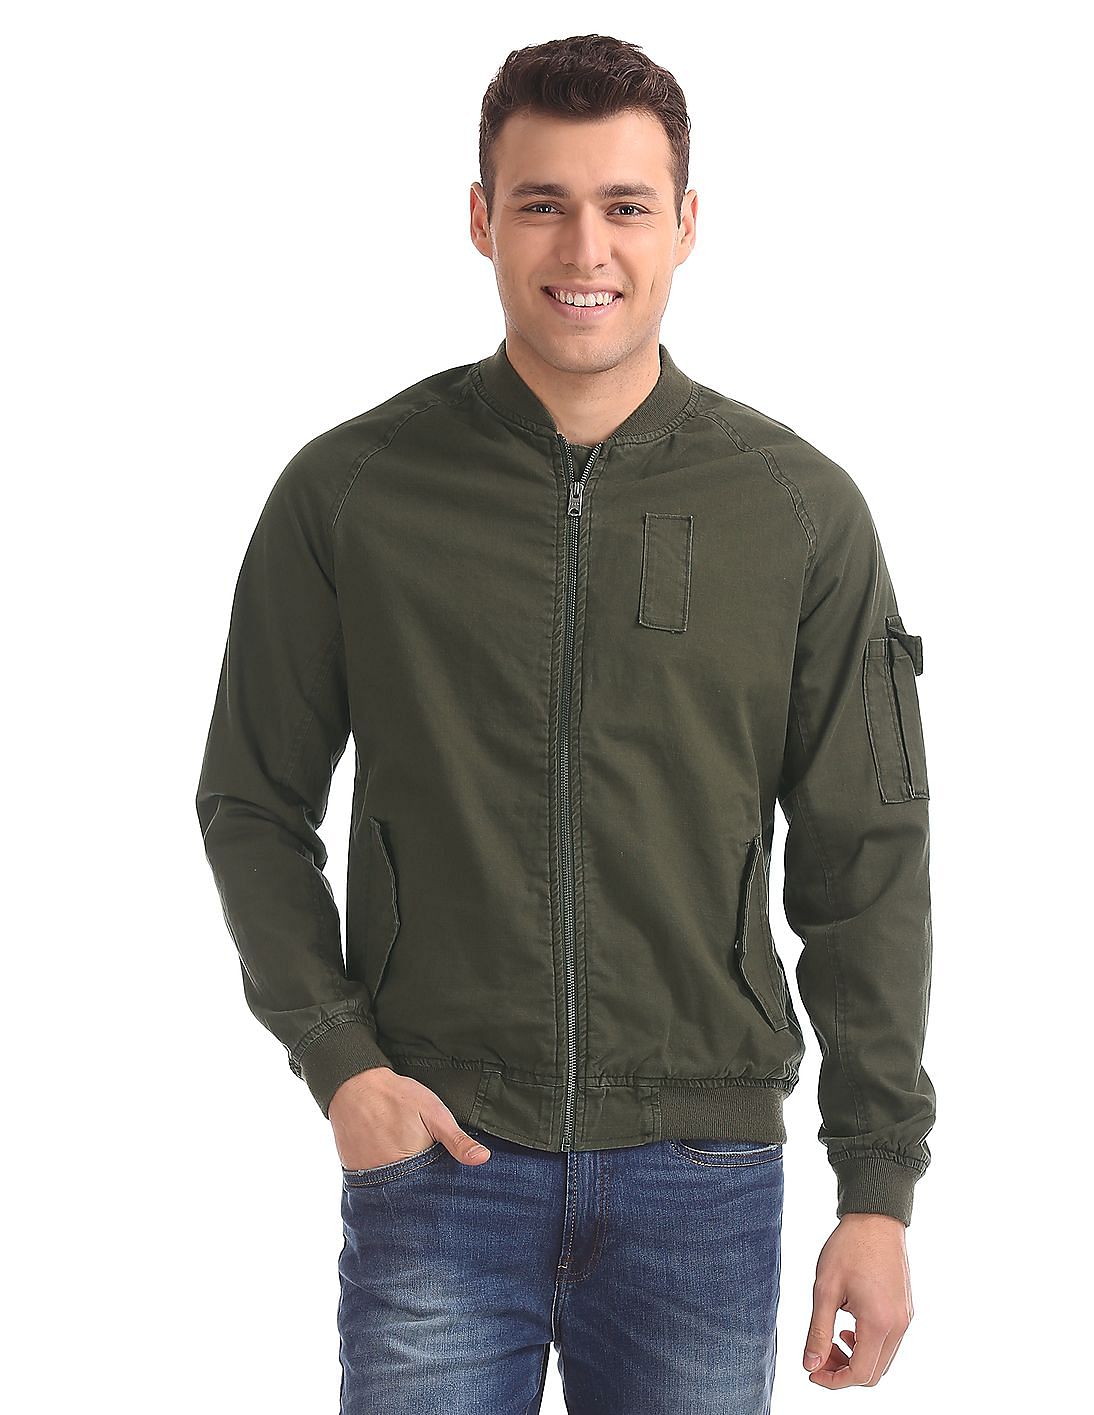 Buy Aeropostale Cotton Solid Bomber Jacket - NNNOW.com